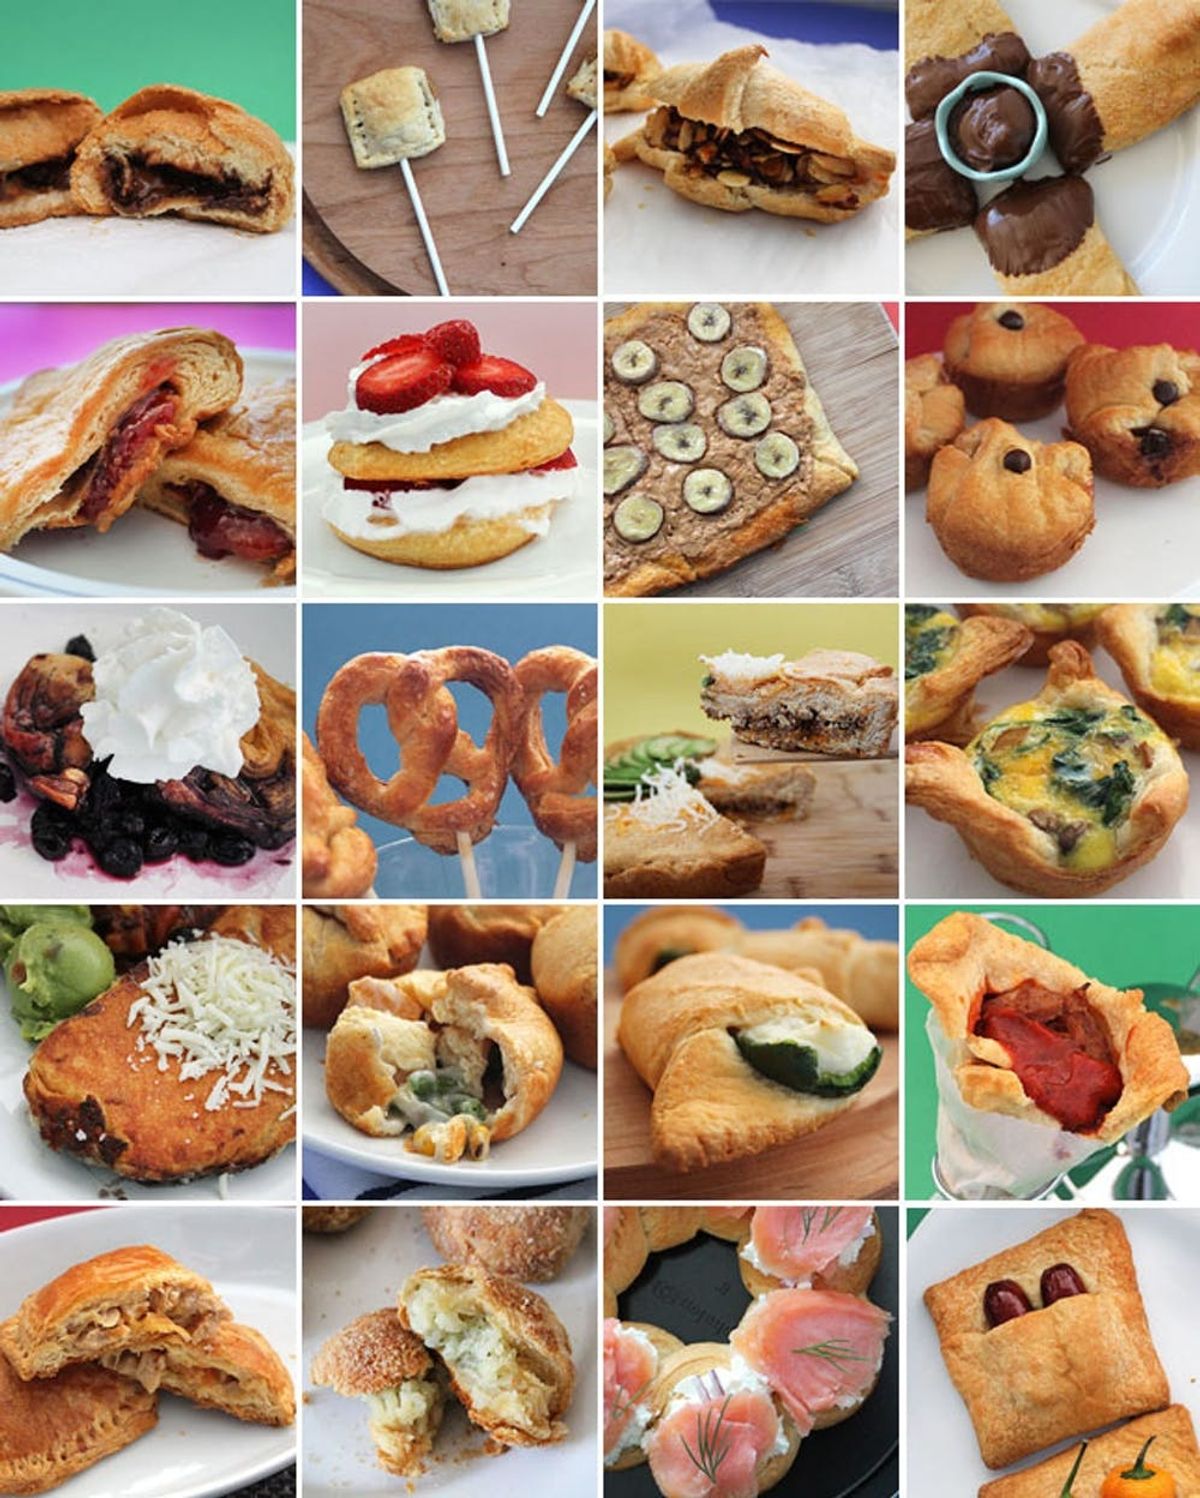 We’re on a Roll: 20 Creative Recipes to Cook with Crescent Rolls